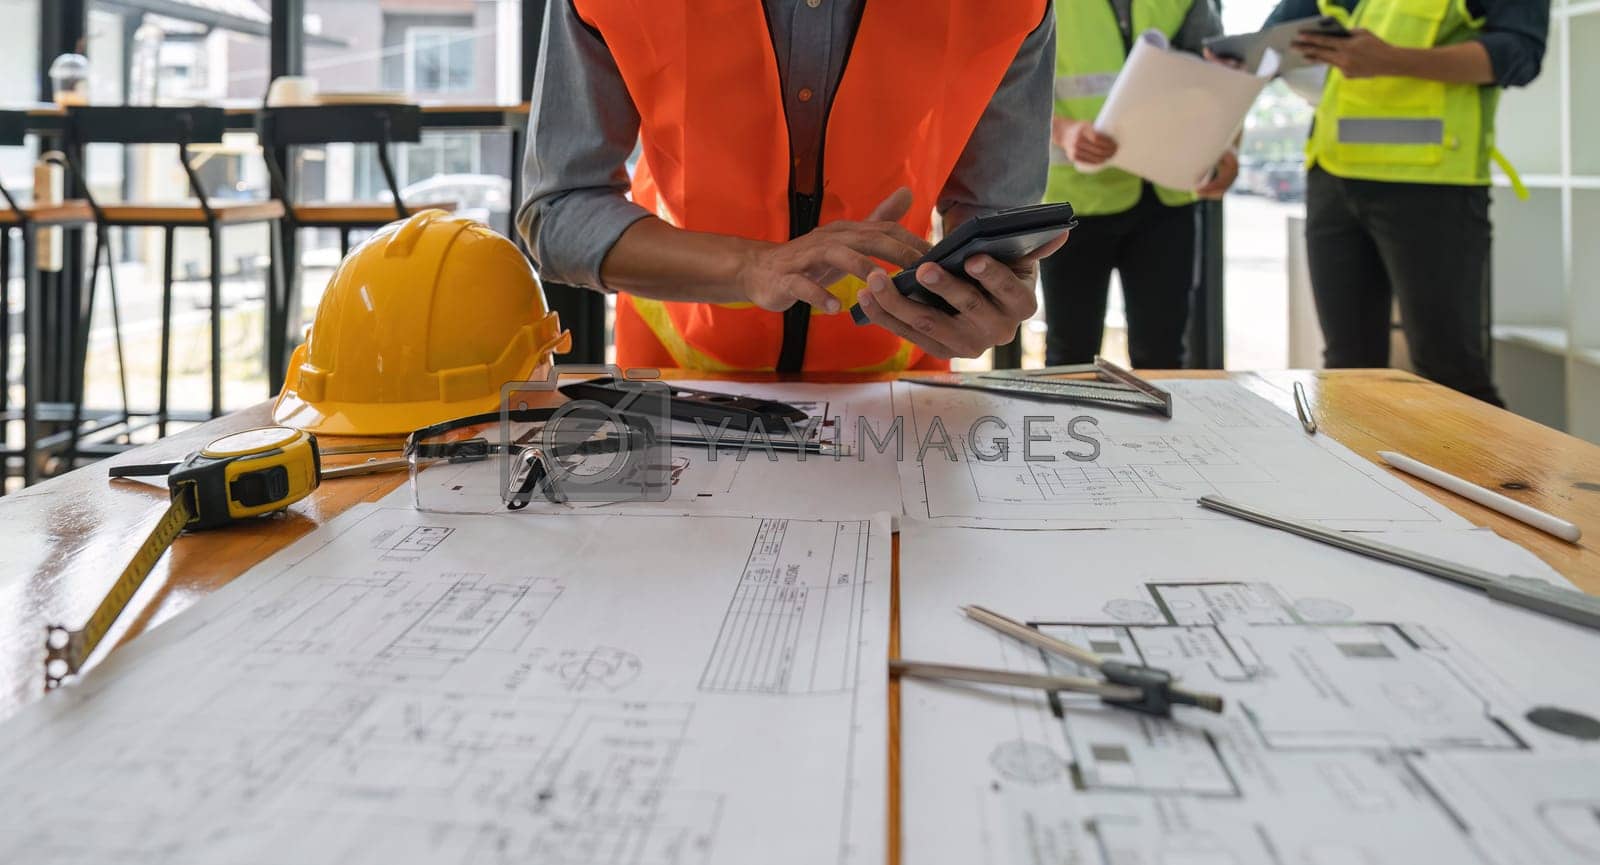 Royalty free image of Engineers working on blueprints and construction plans. Building engineers calculate and draft building construction drawings, civil engineering, and construction business concepts by nateemee